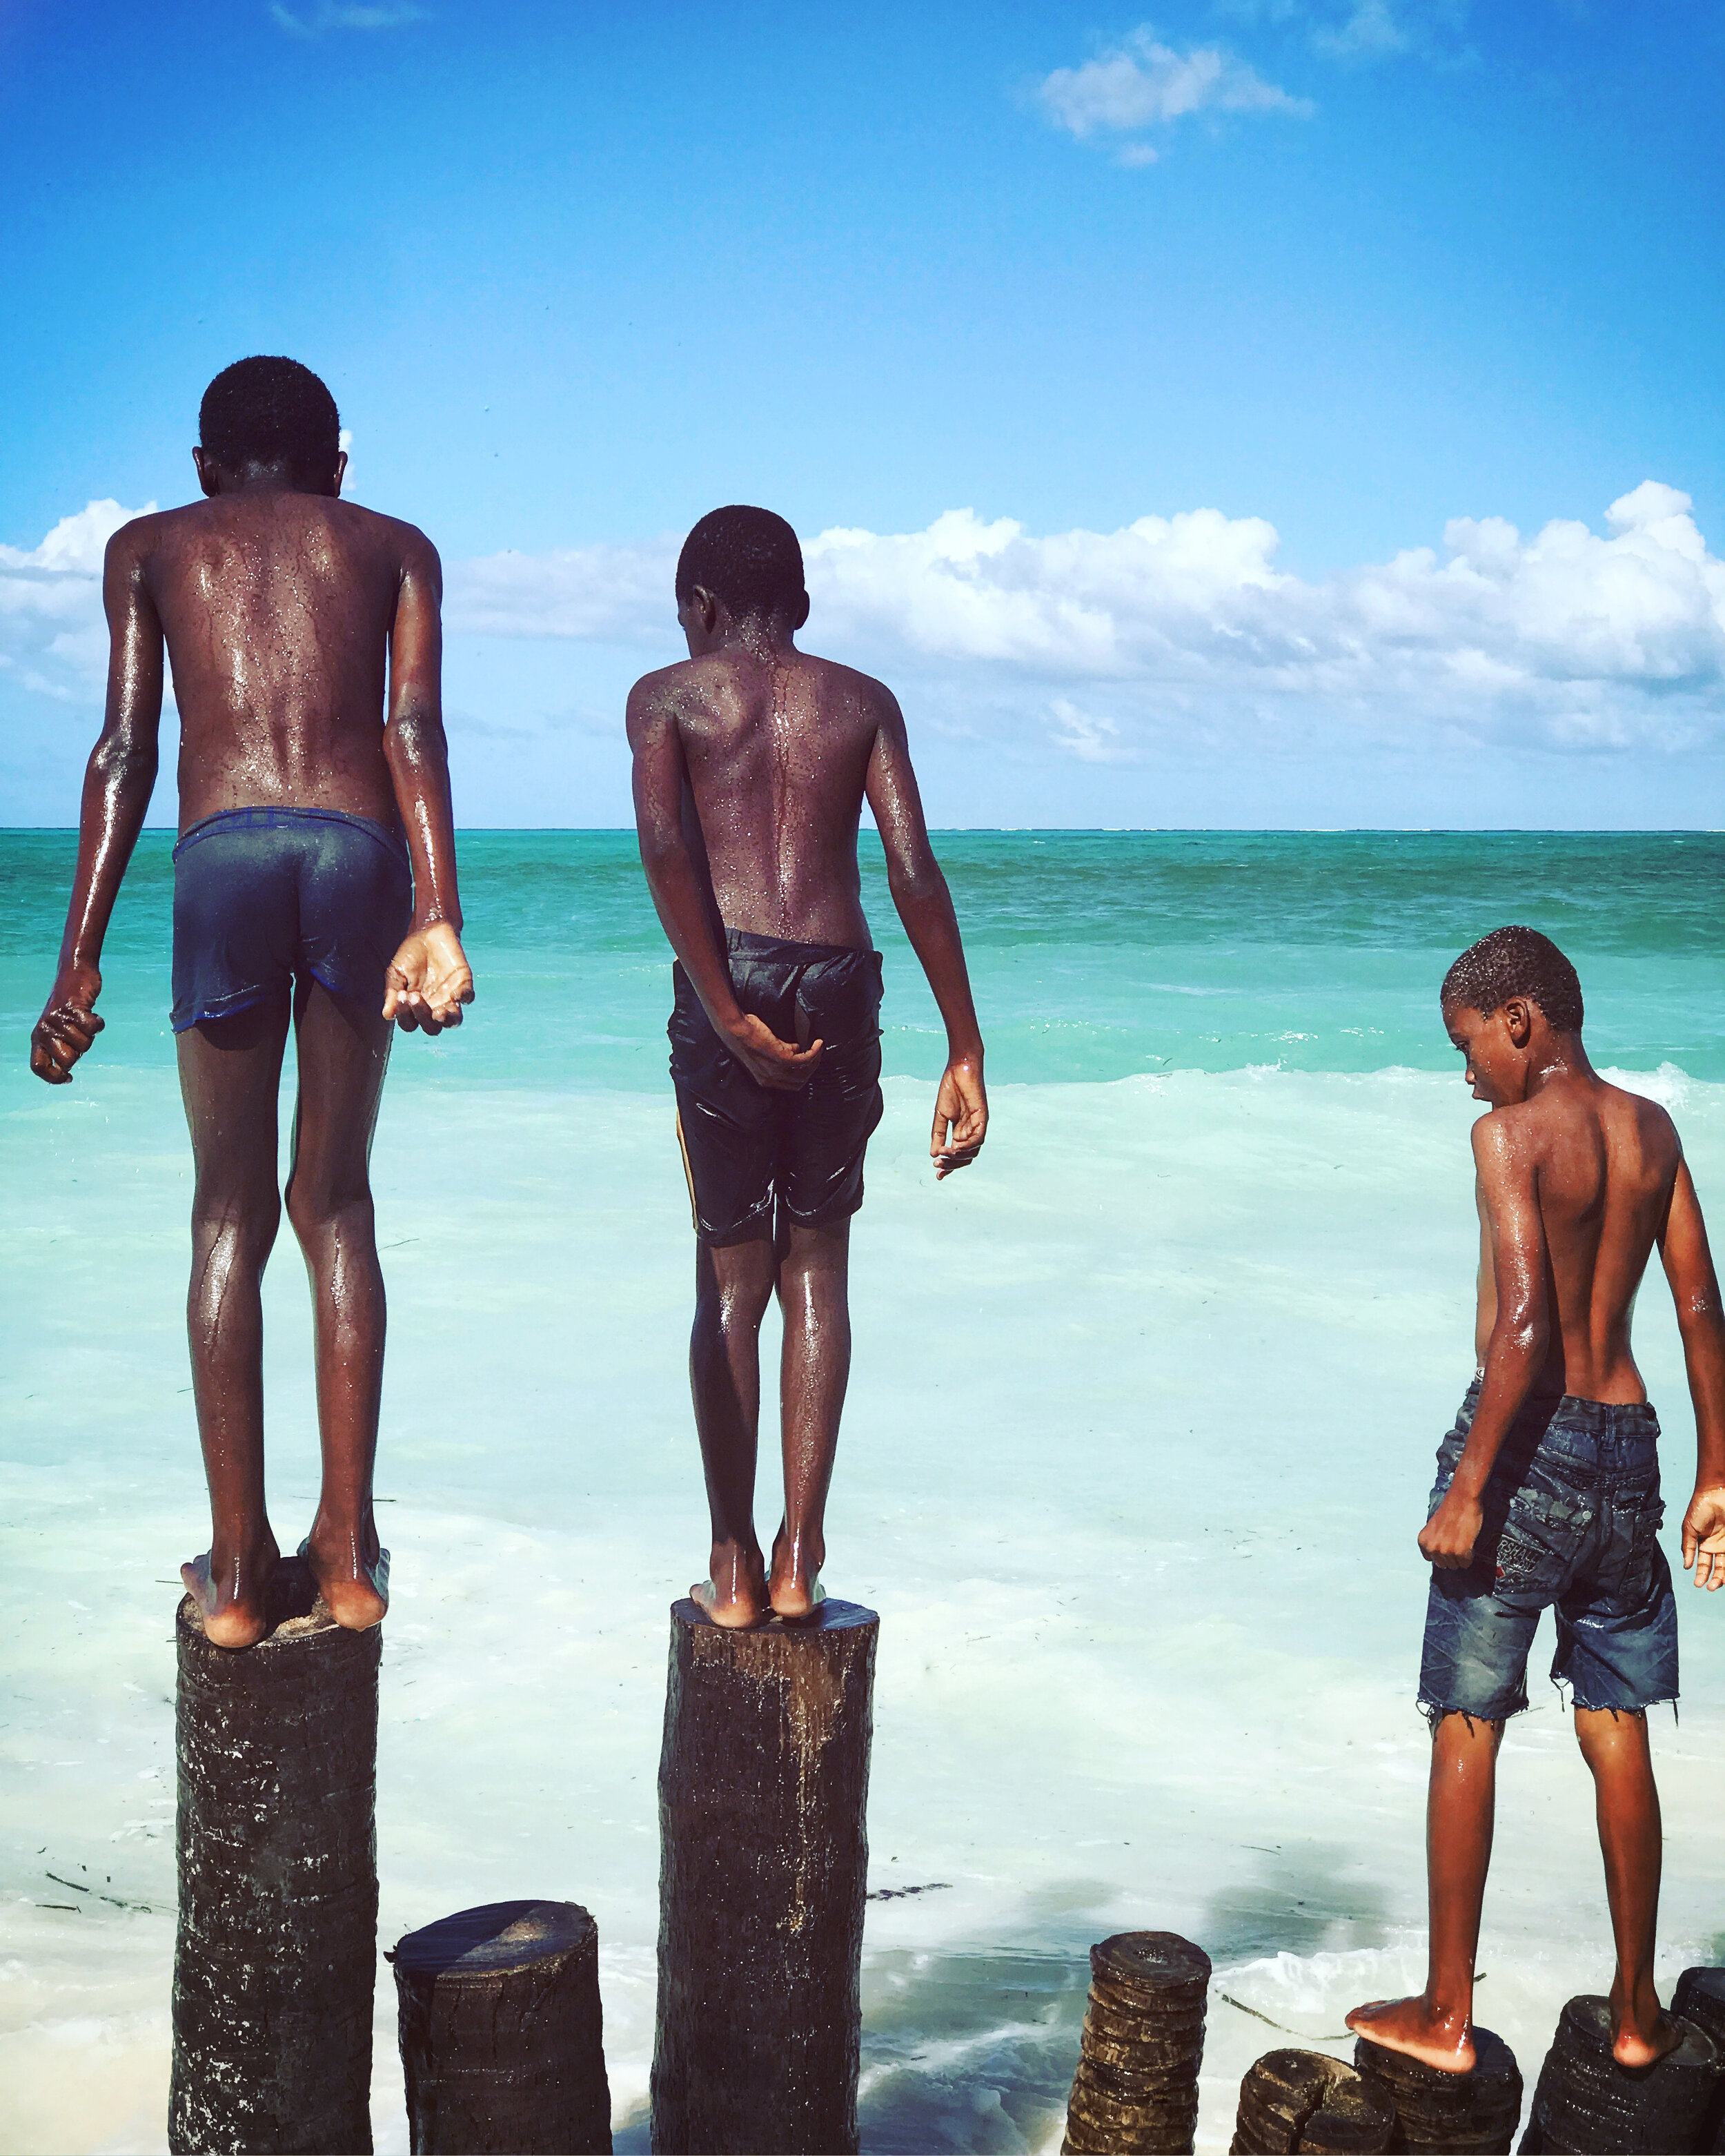  Boys use pile-ons, meant to dissipate the force of the ocean’s waves, as diving posts    Zanzibar 